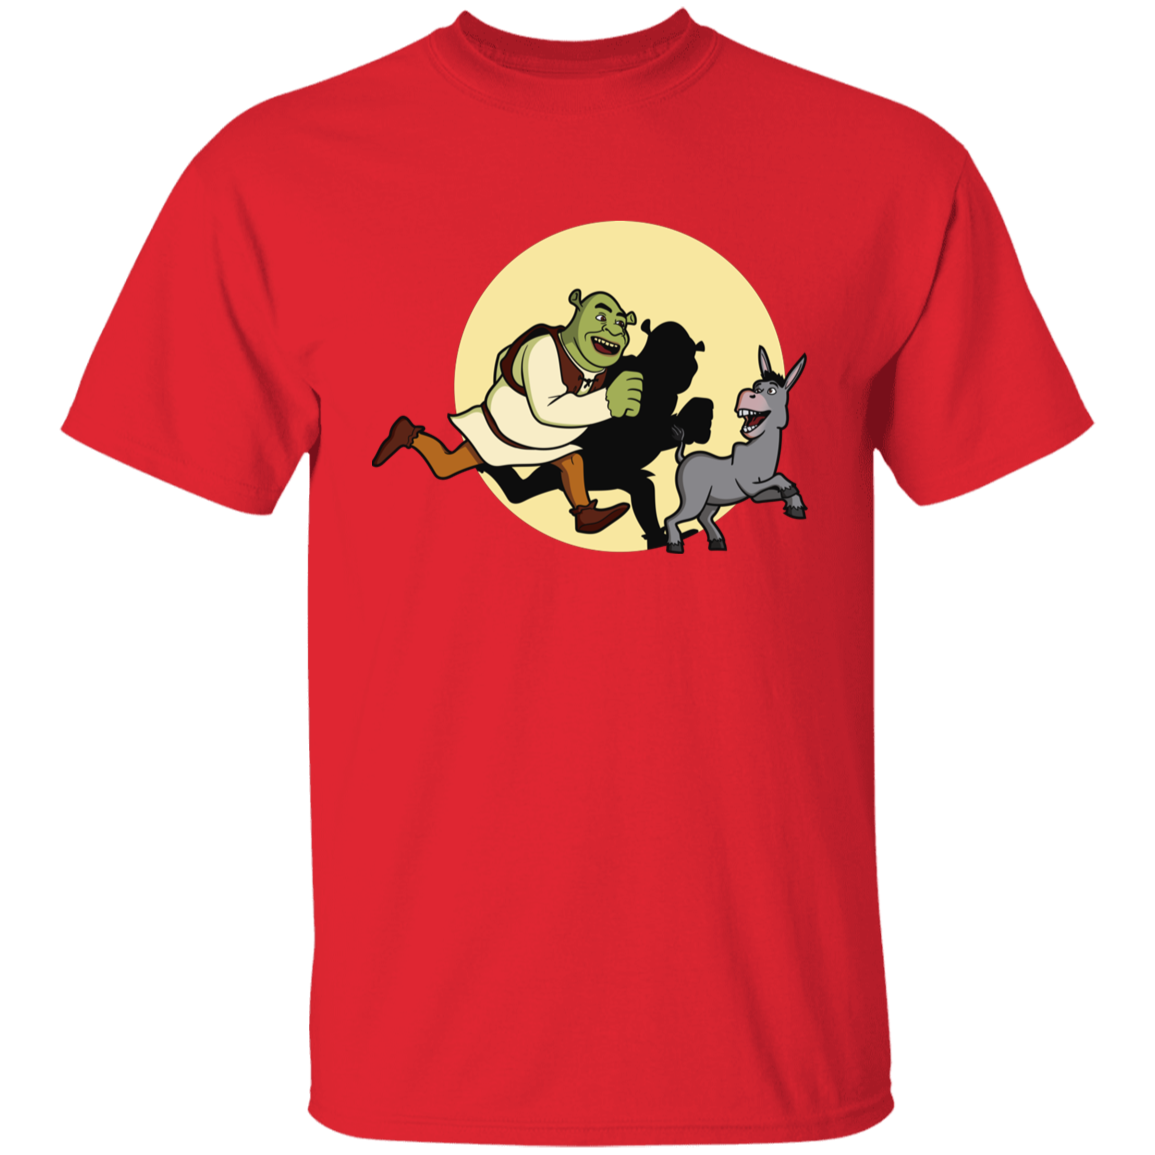 The Adventures of Shrek Youth T-Shirt